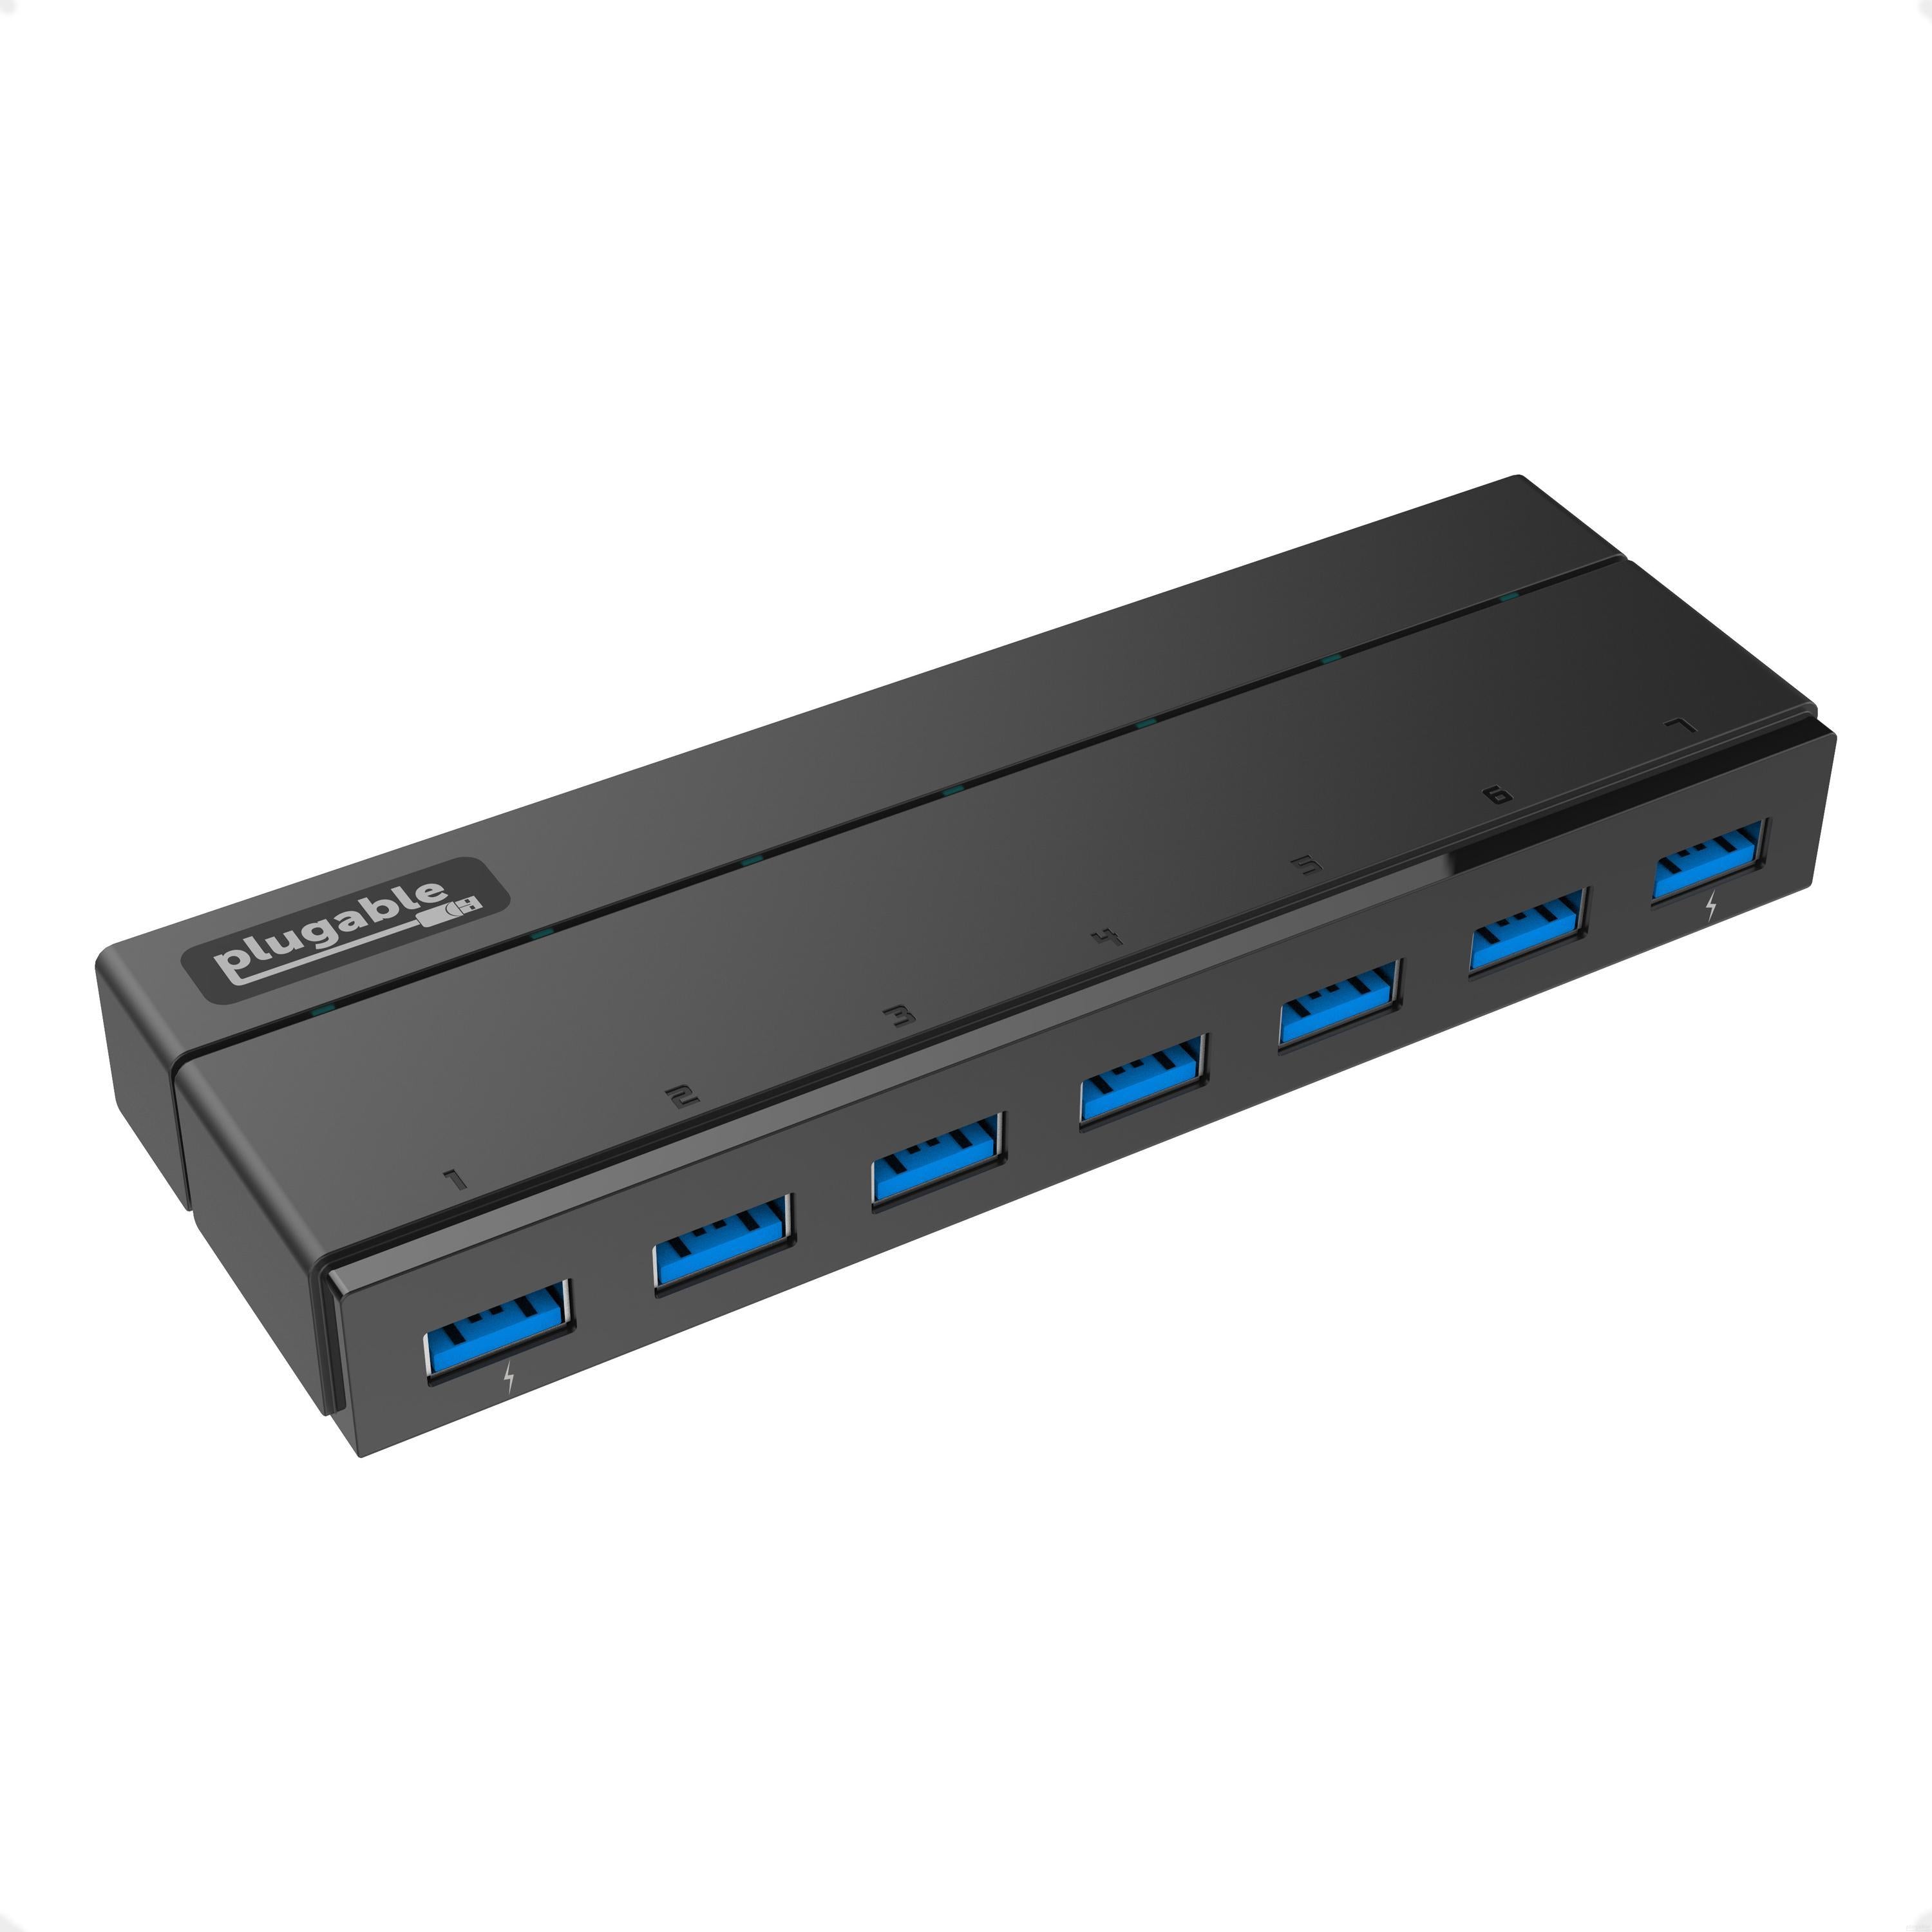 Kvæle Seneste nyt Delvis USB 3.0 7-Port Hub with 2 BC 1.2 Charging Ports and 36W Power Adapter –  Plugable Technologies